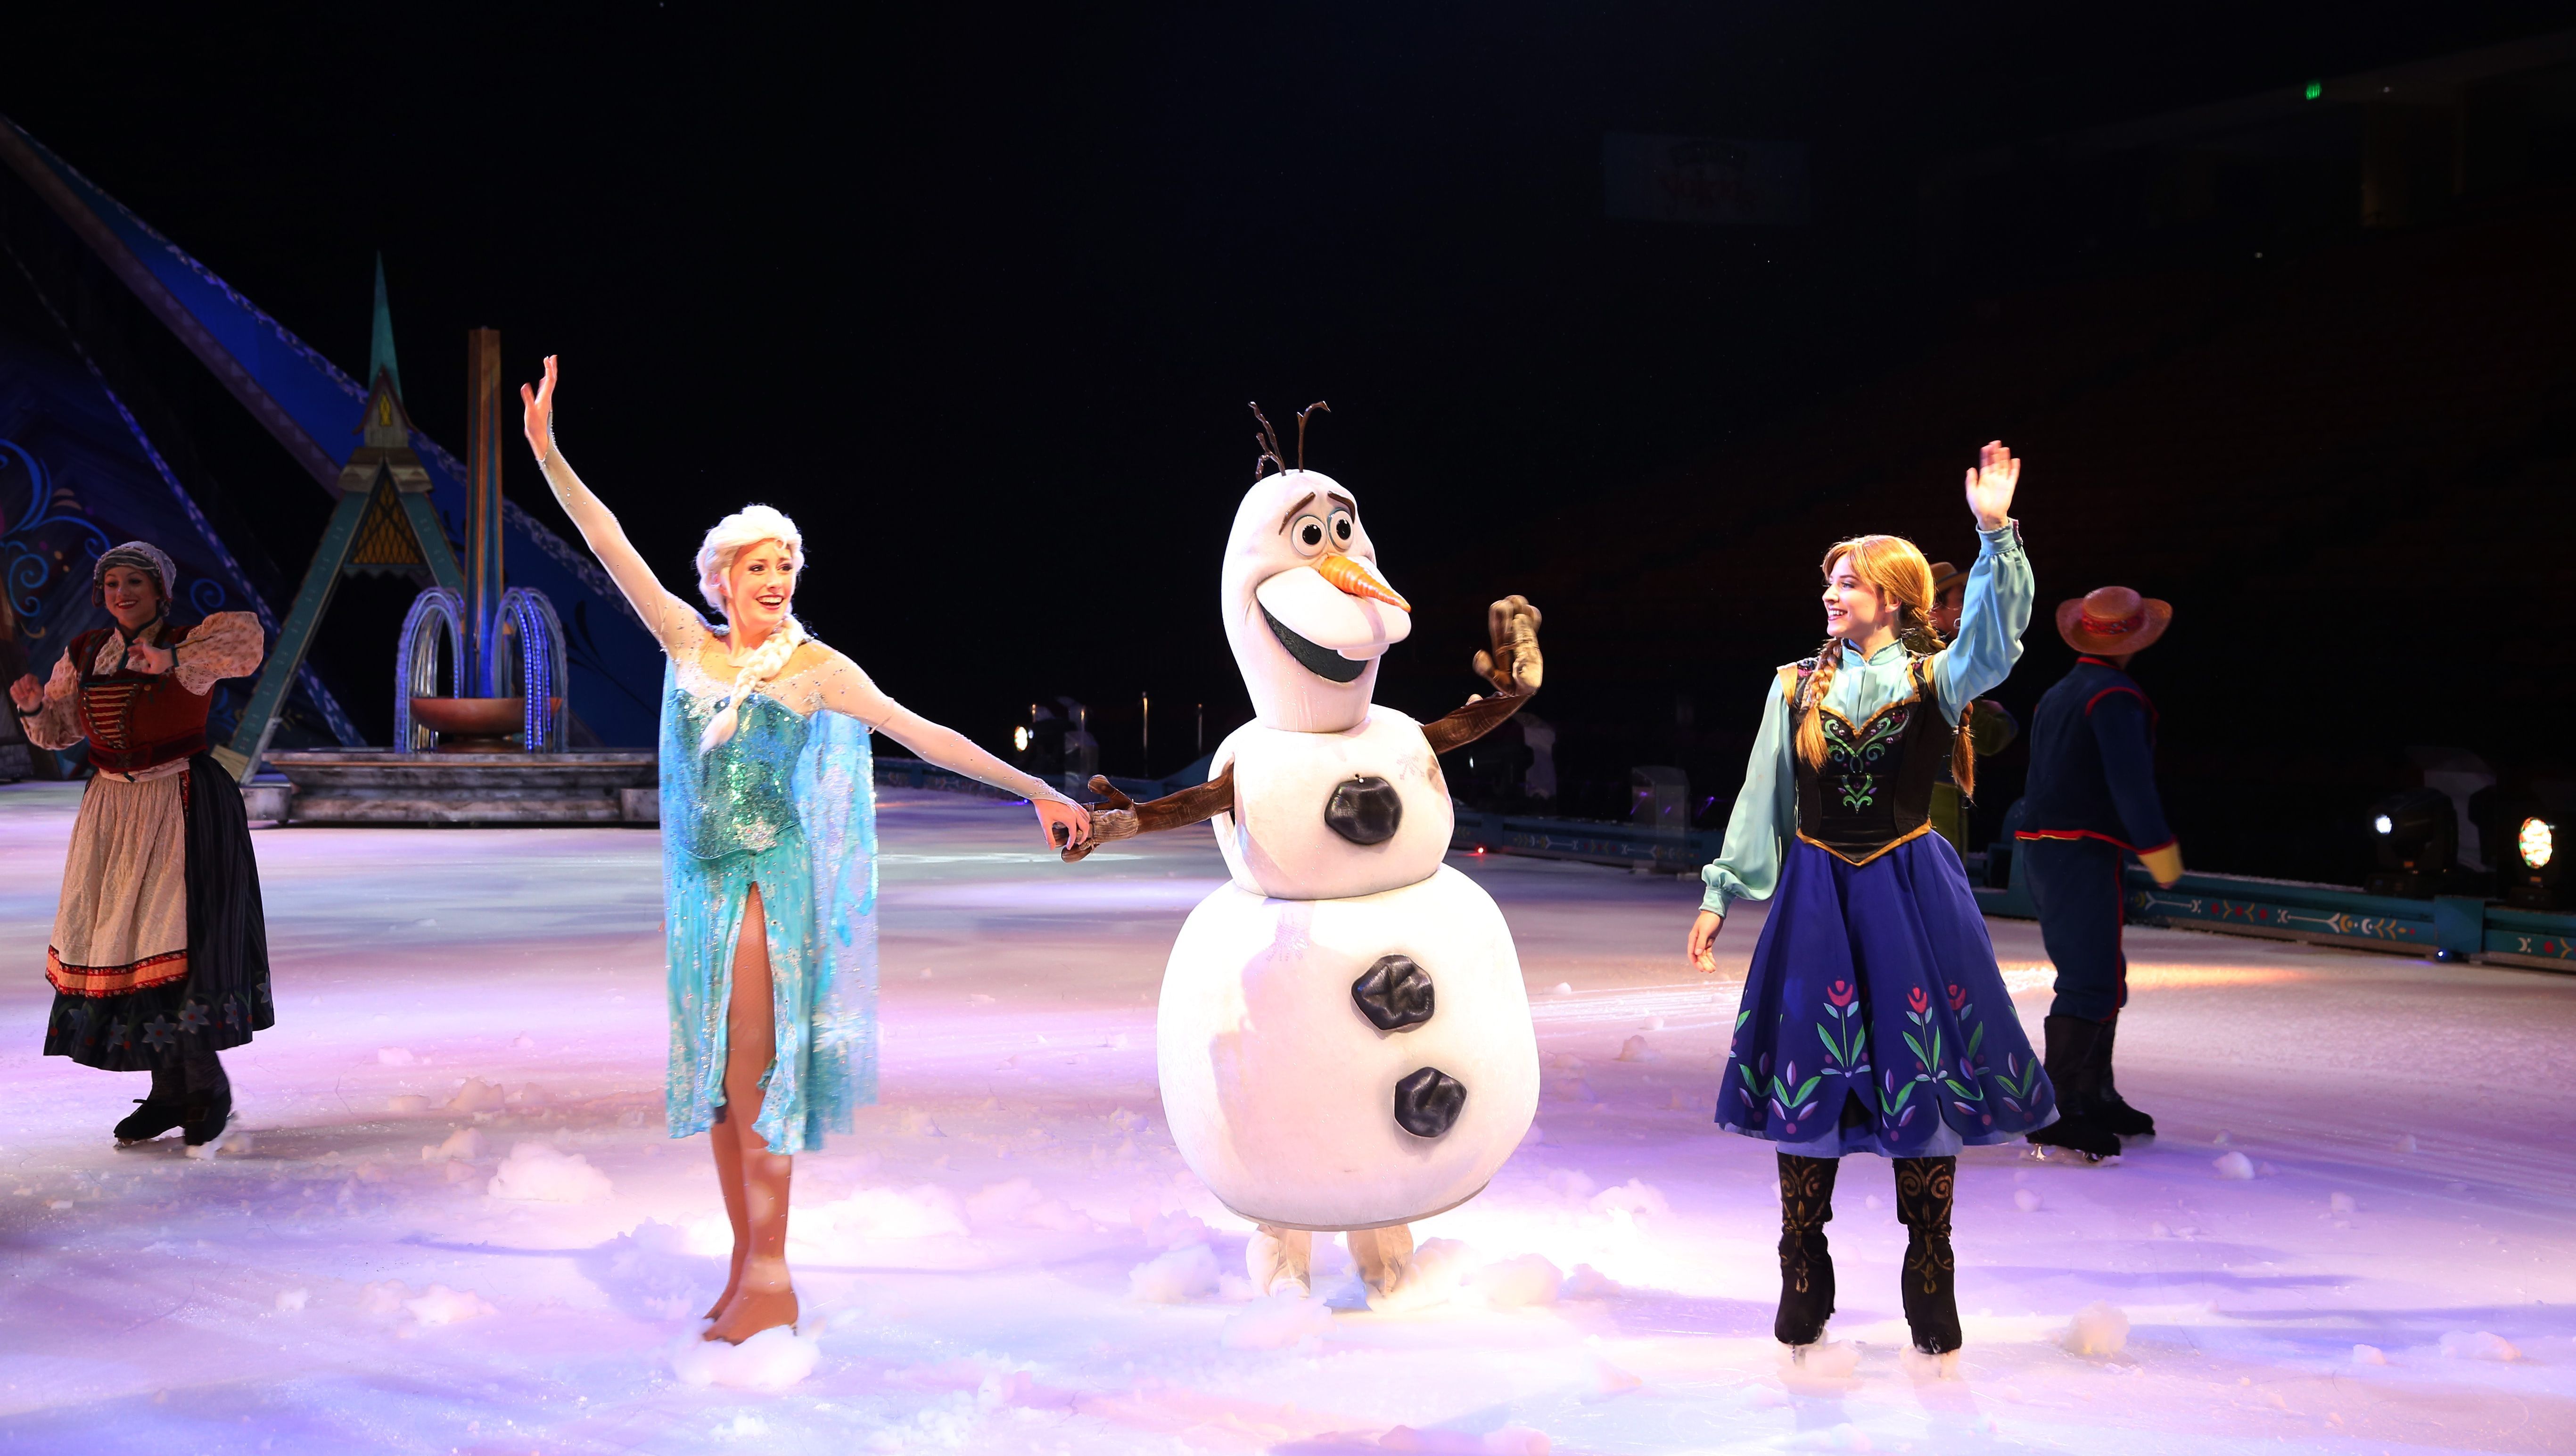 We’re Excited One More Week Til Disney Frozen on Ice!